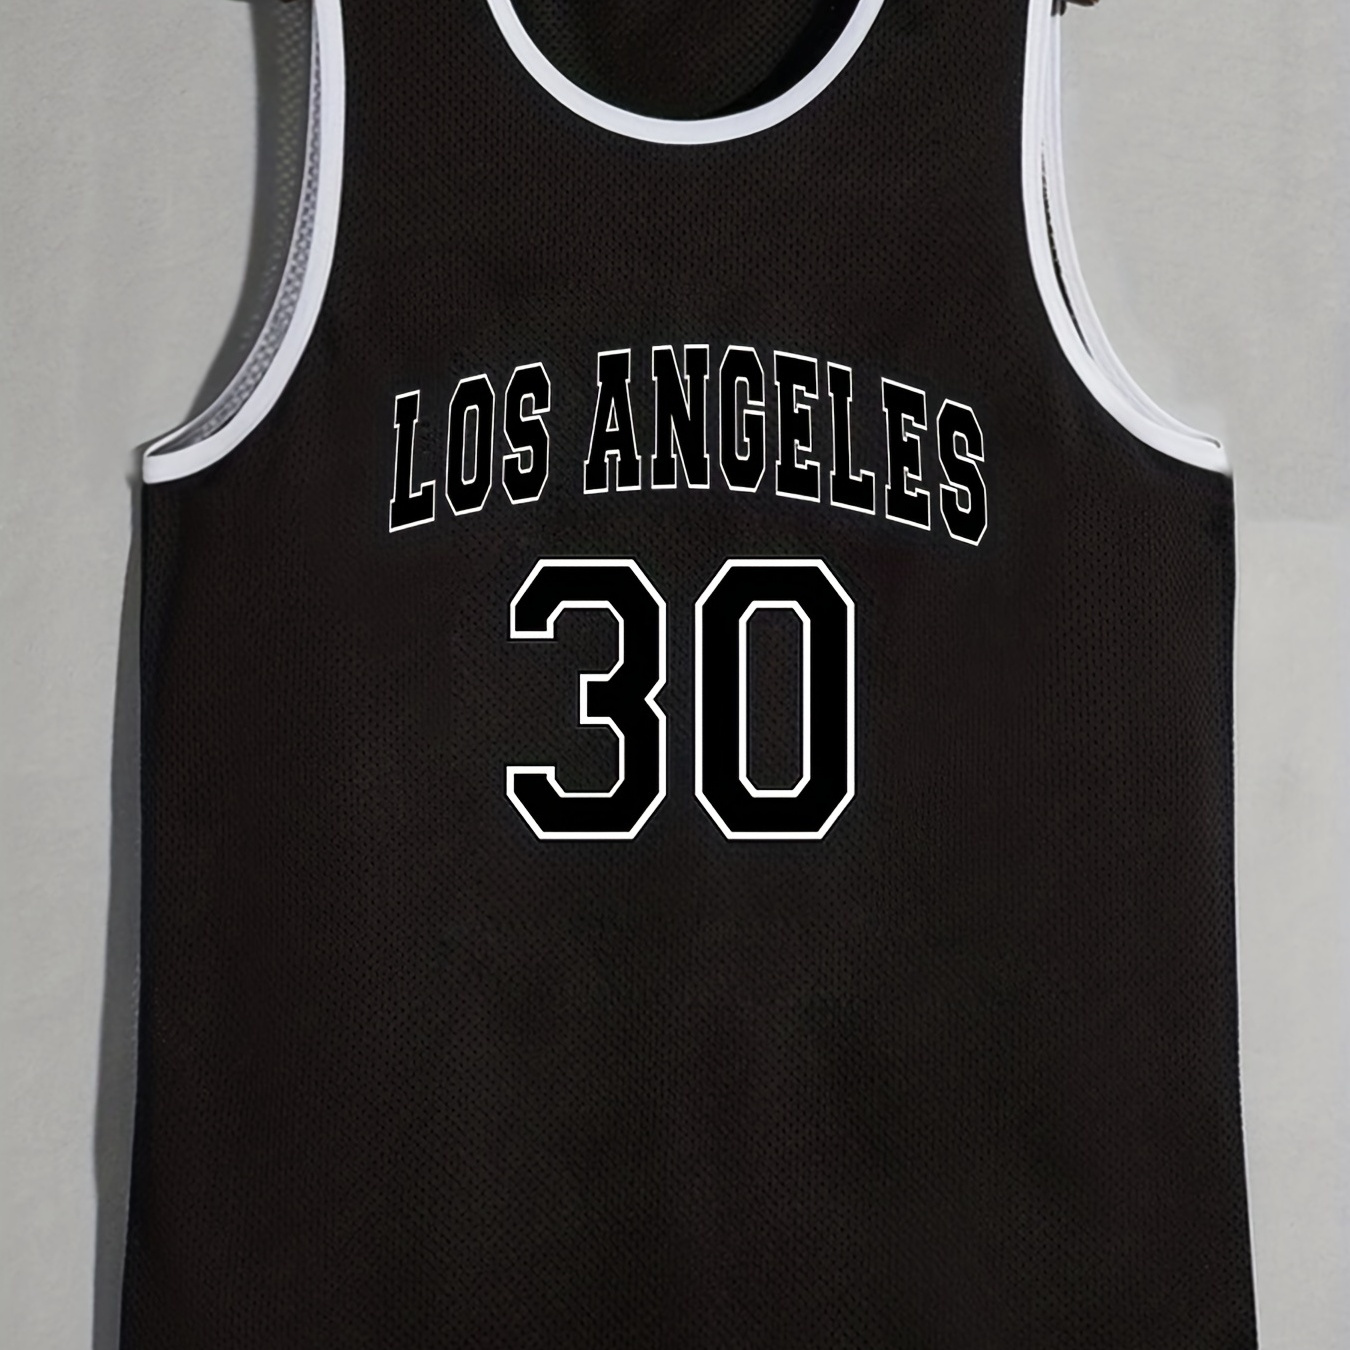 

Men's Letter "los Angeles" And Numbers 30 Graphic Sleeveless Shirt, Breathable Basketball Sports Tank Top, Summer Clothes